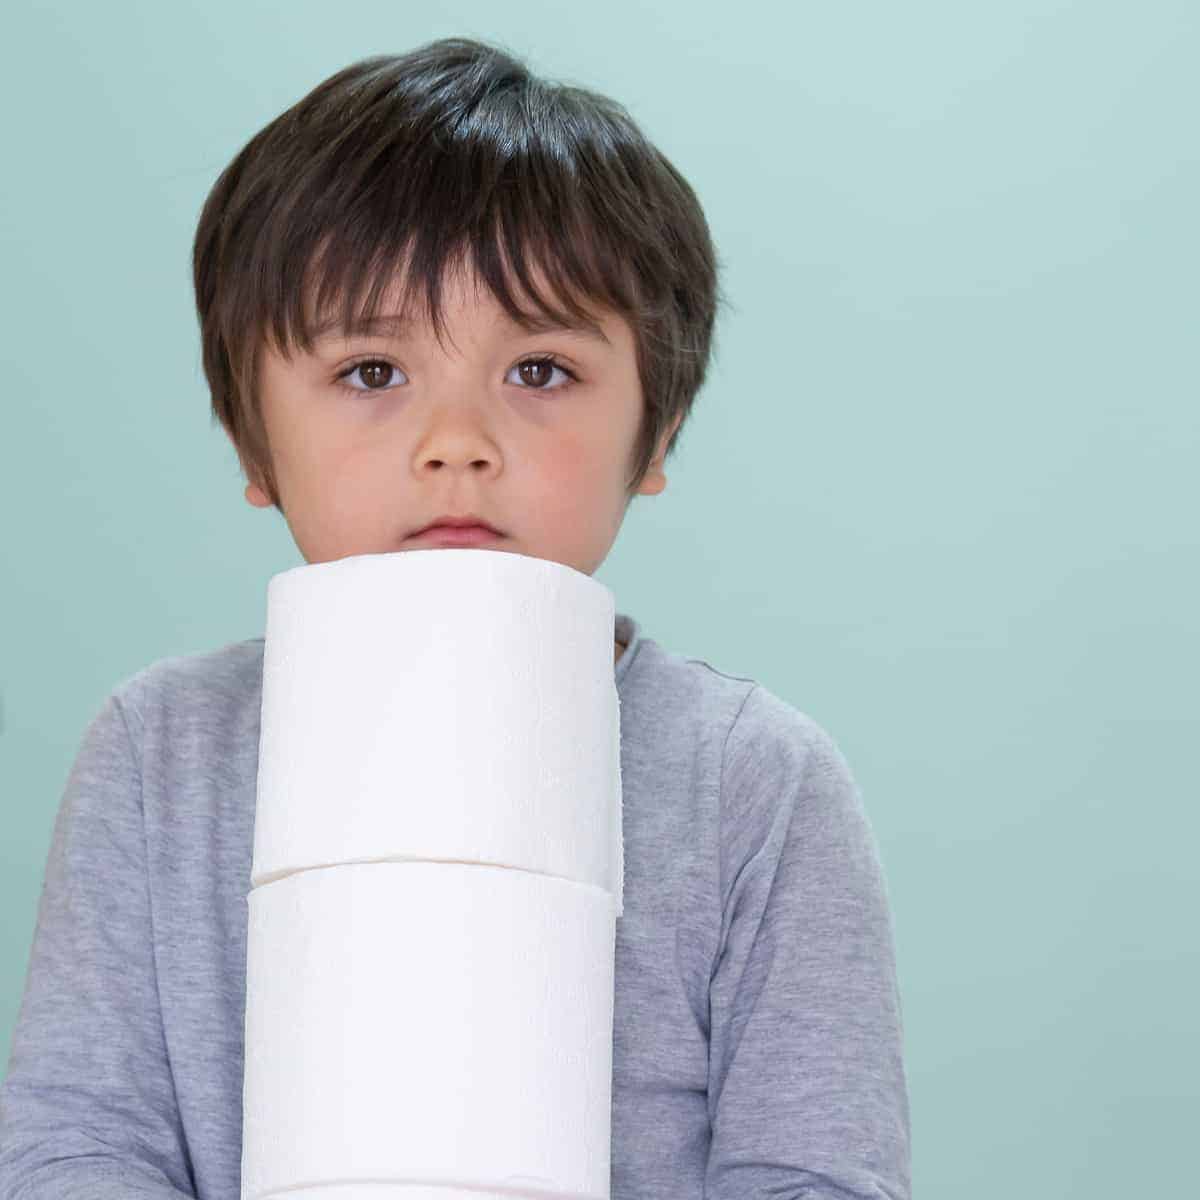 Potty Training and Toilet Problems in Kids with Sensory Issues